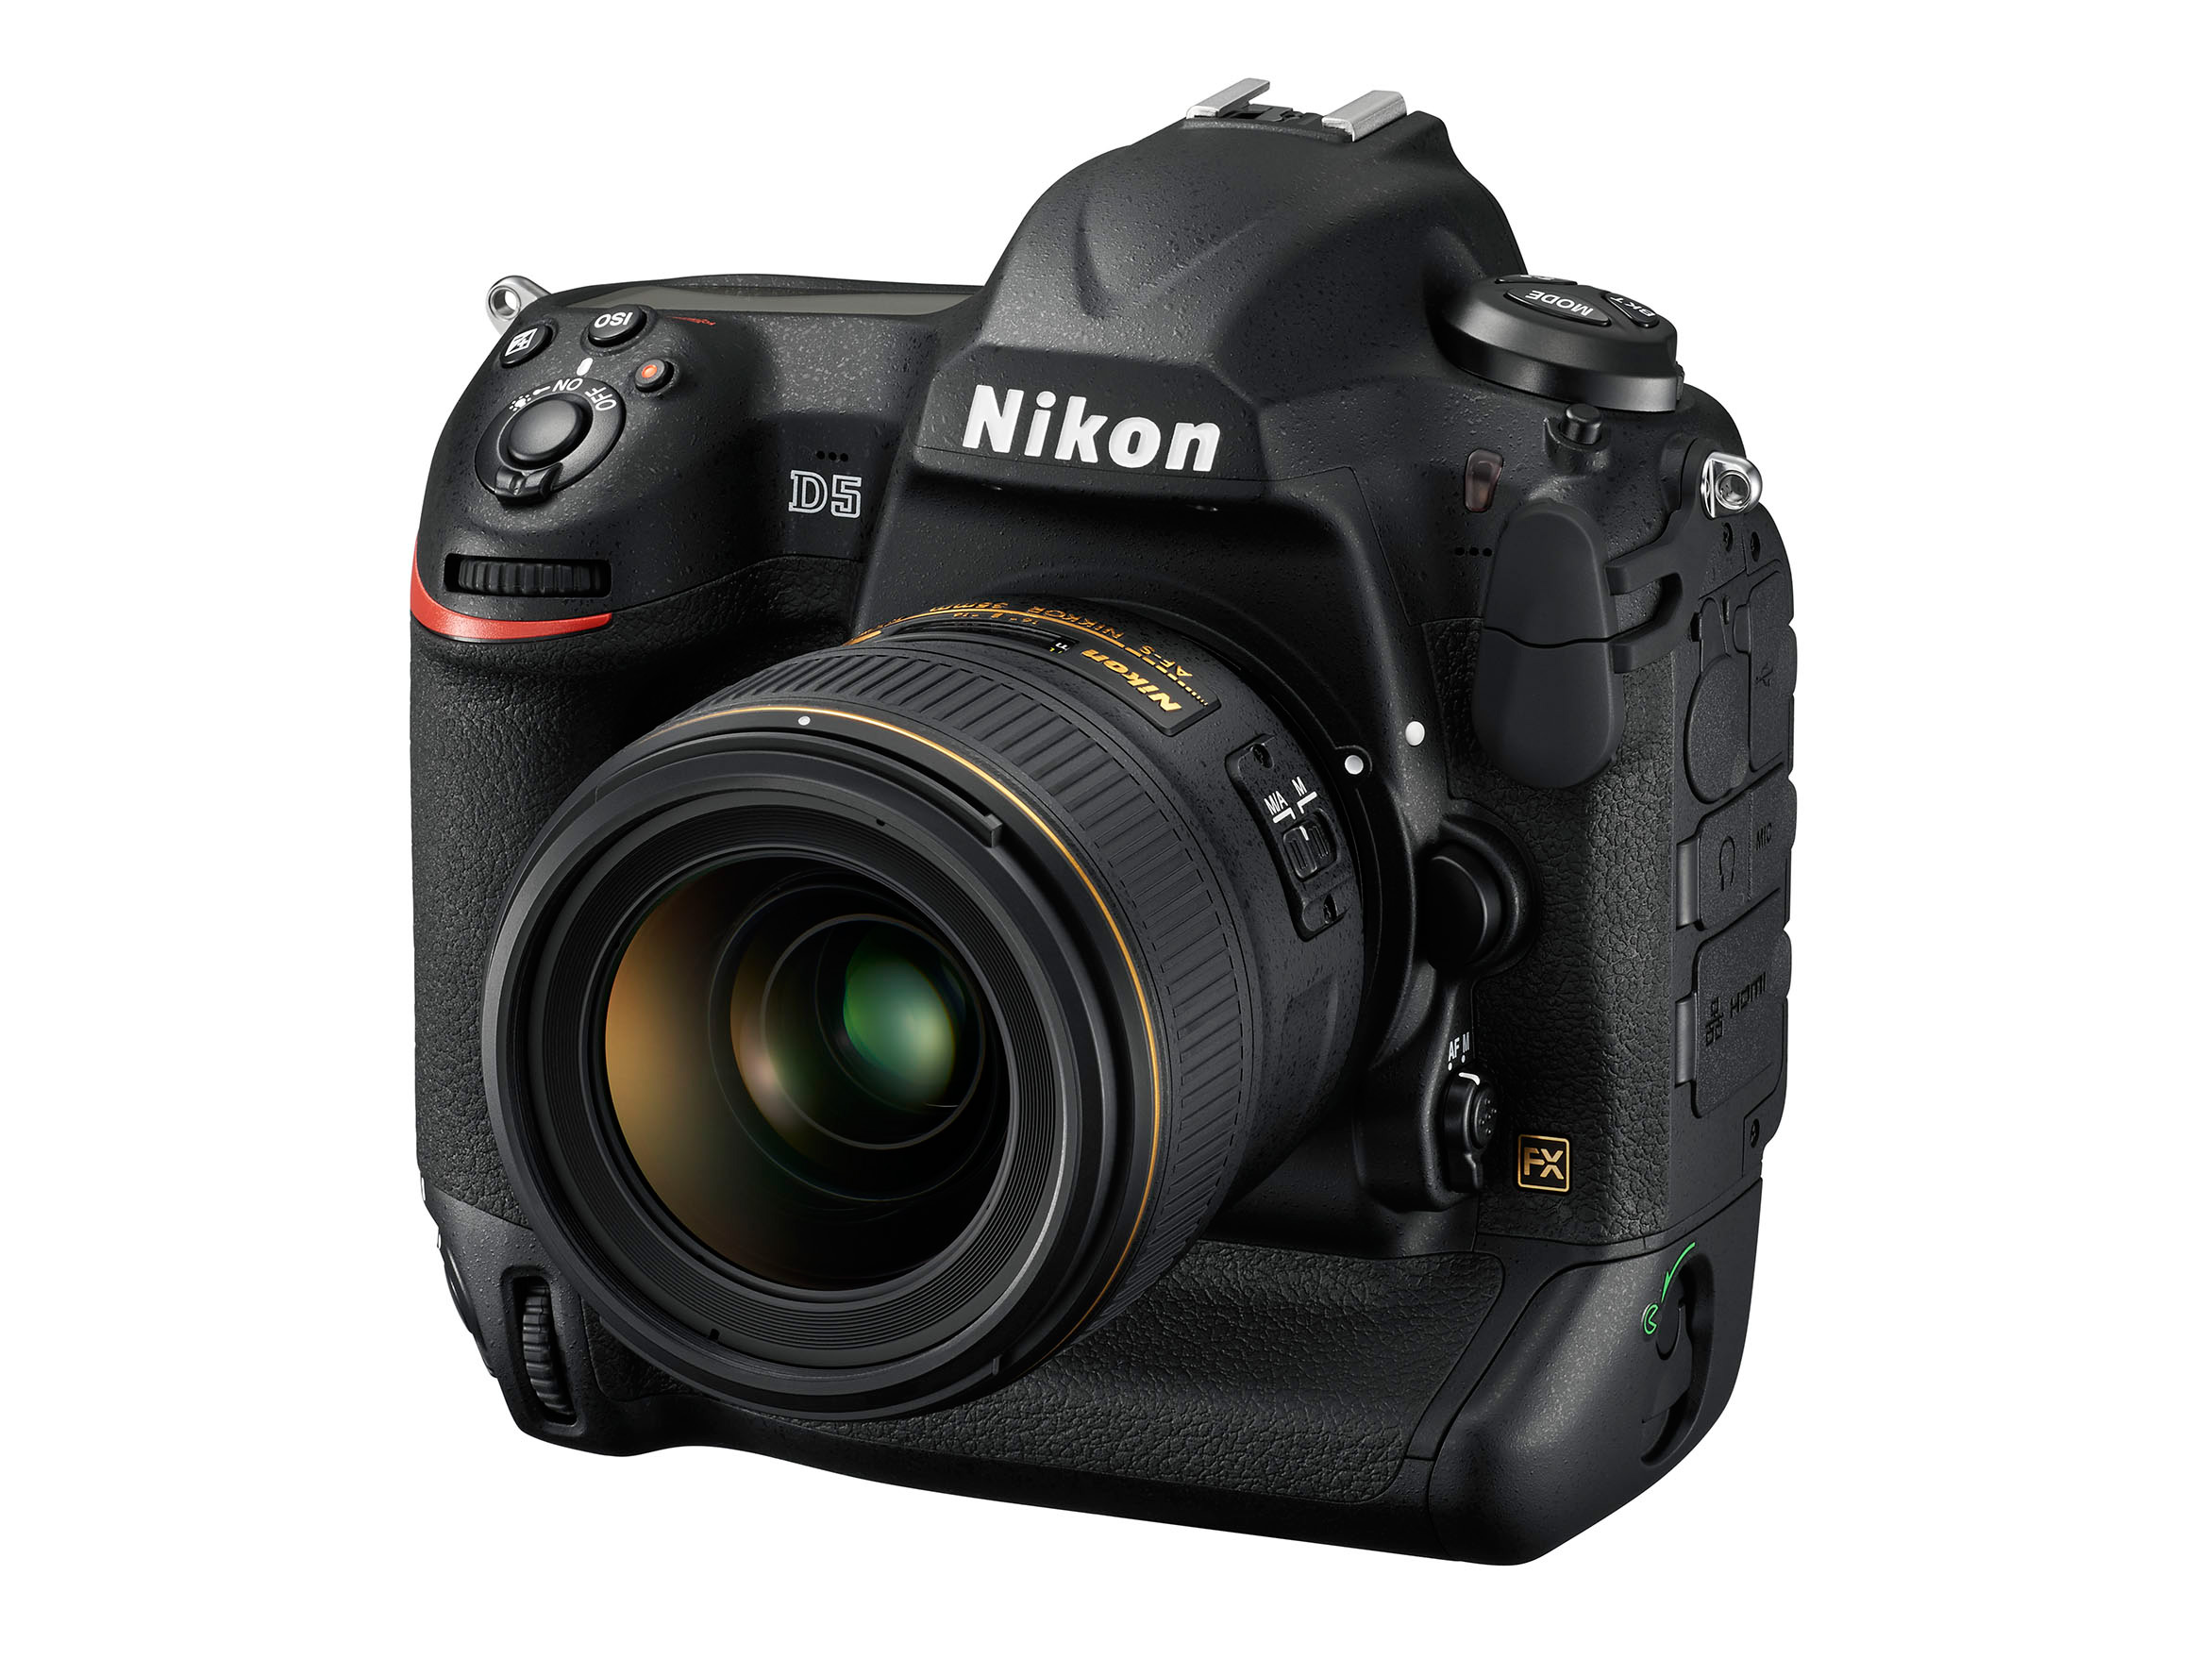 Nikon D5 Shipping Date Confirmed: March 26th